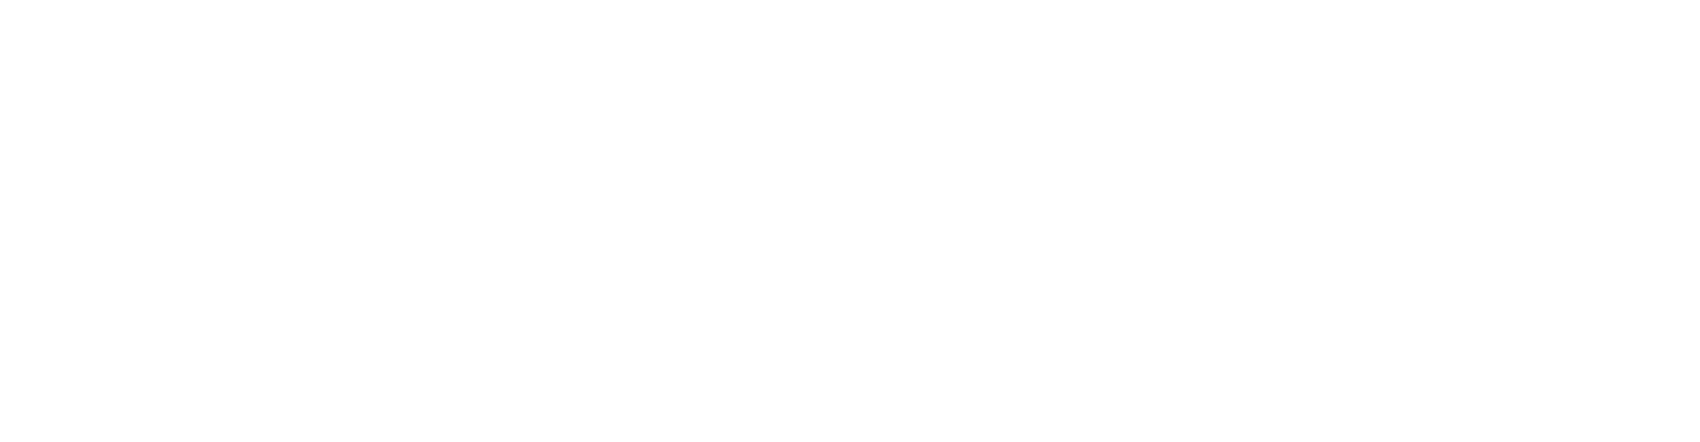 eCompliance_standard_white@2x.png